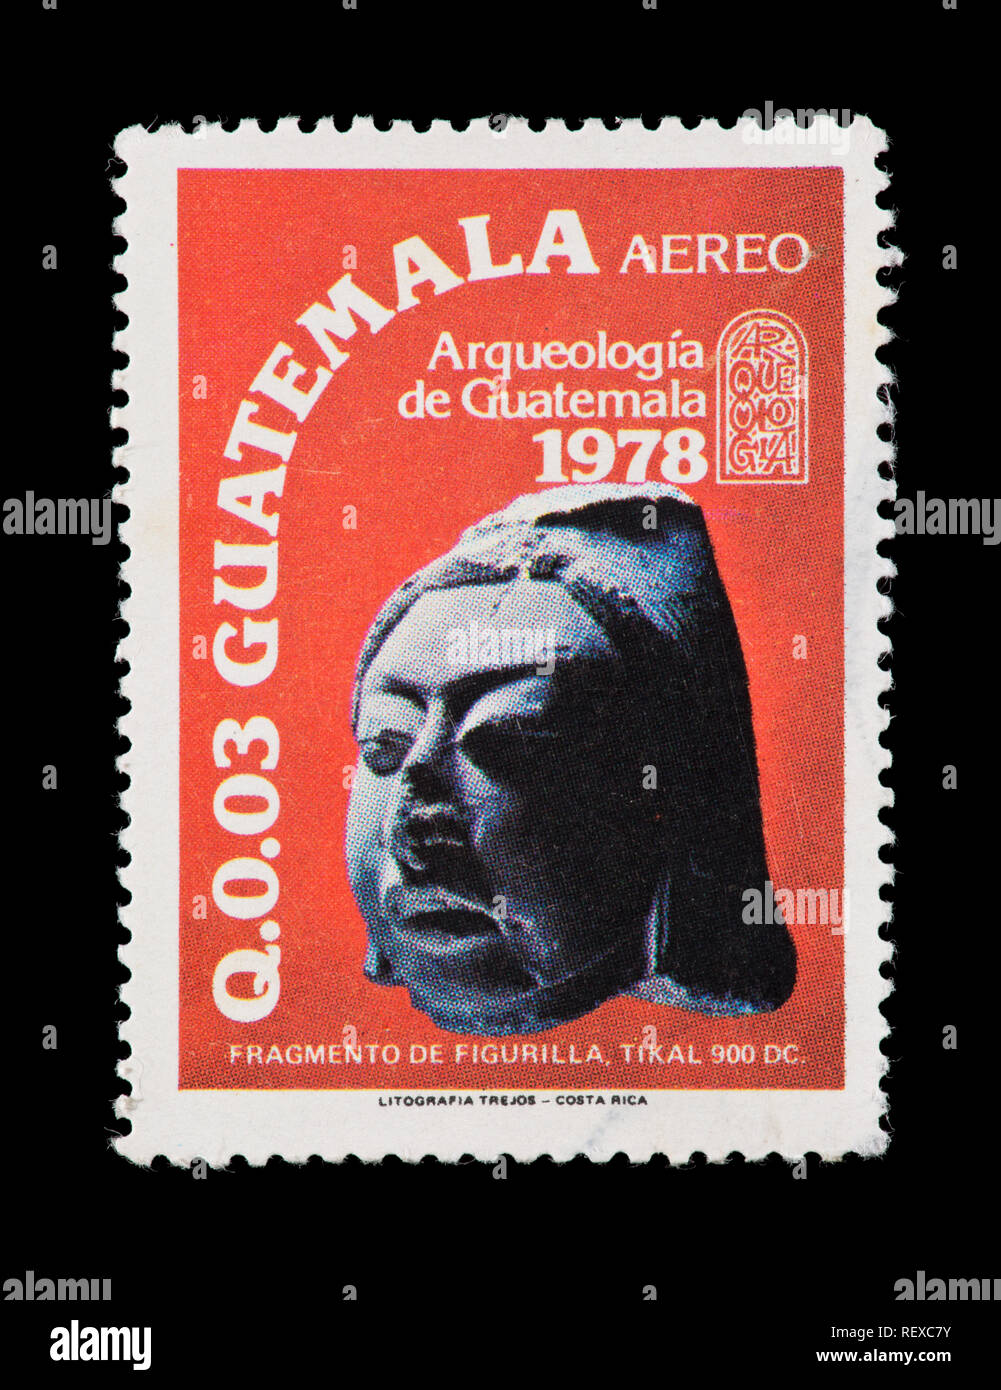 Airmail postage stamp from Guatemala depicting a ceramic woman's head from about 900 A.D, from Tikal. Stock Photo